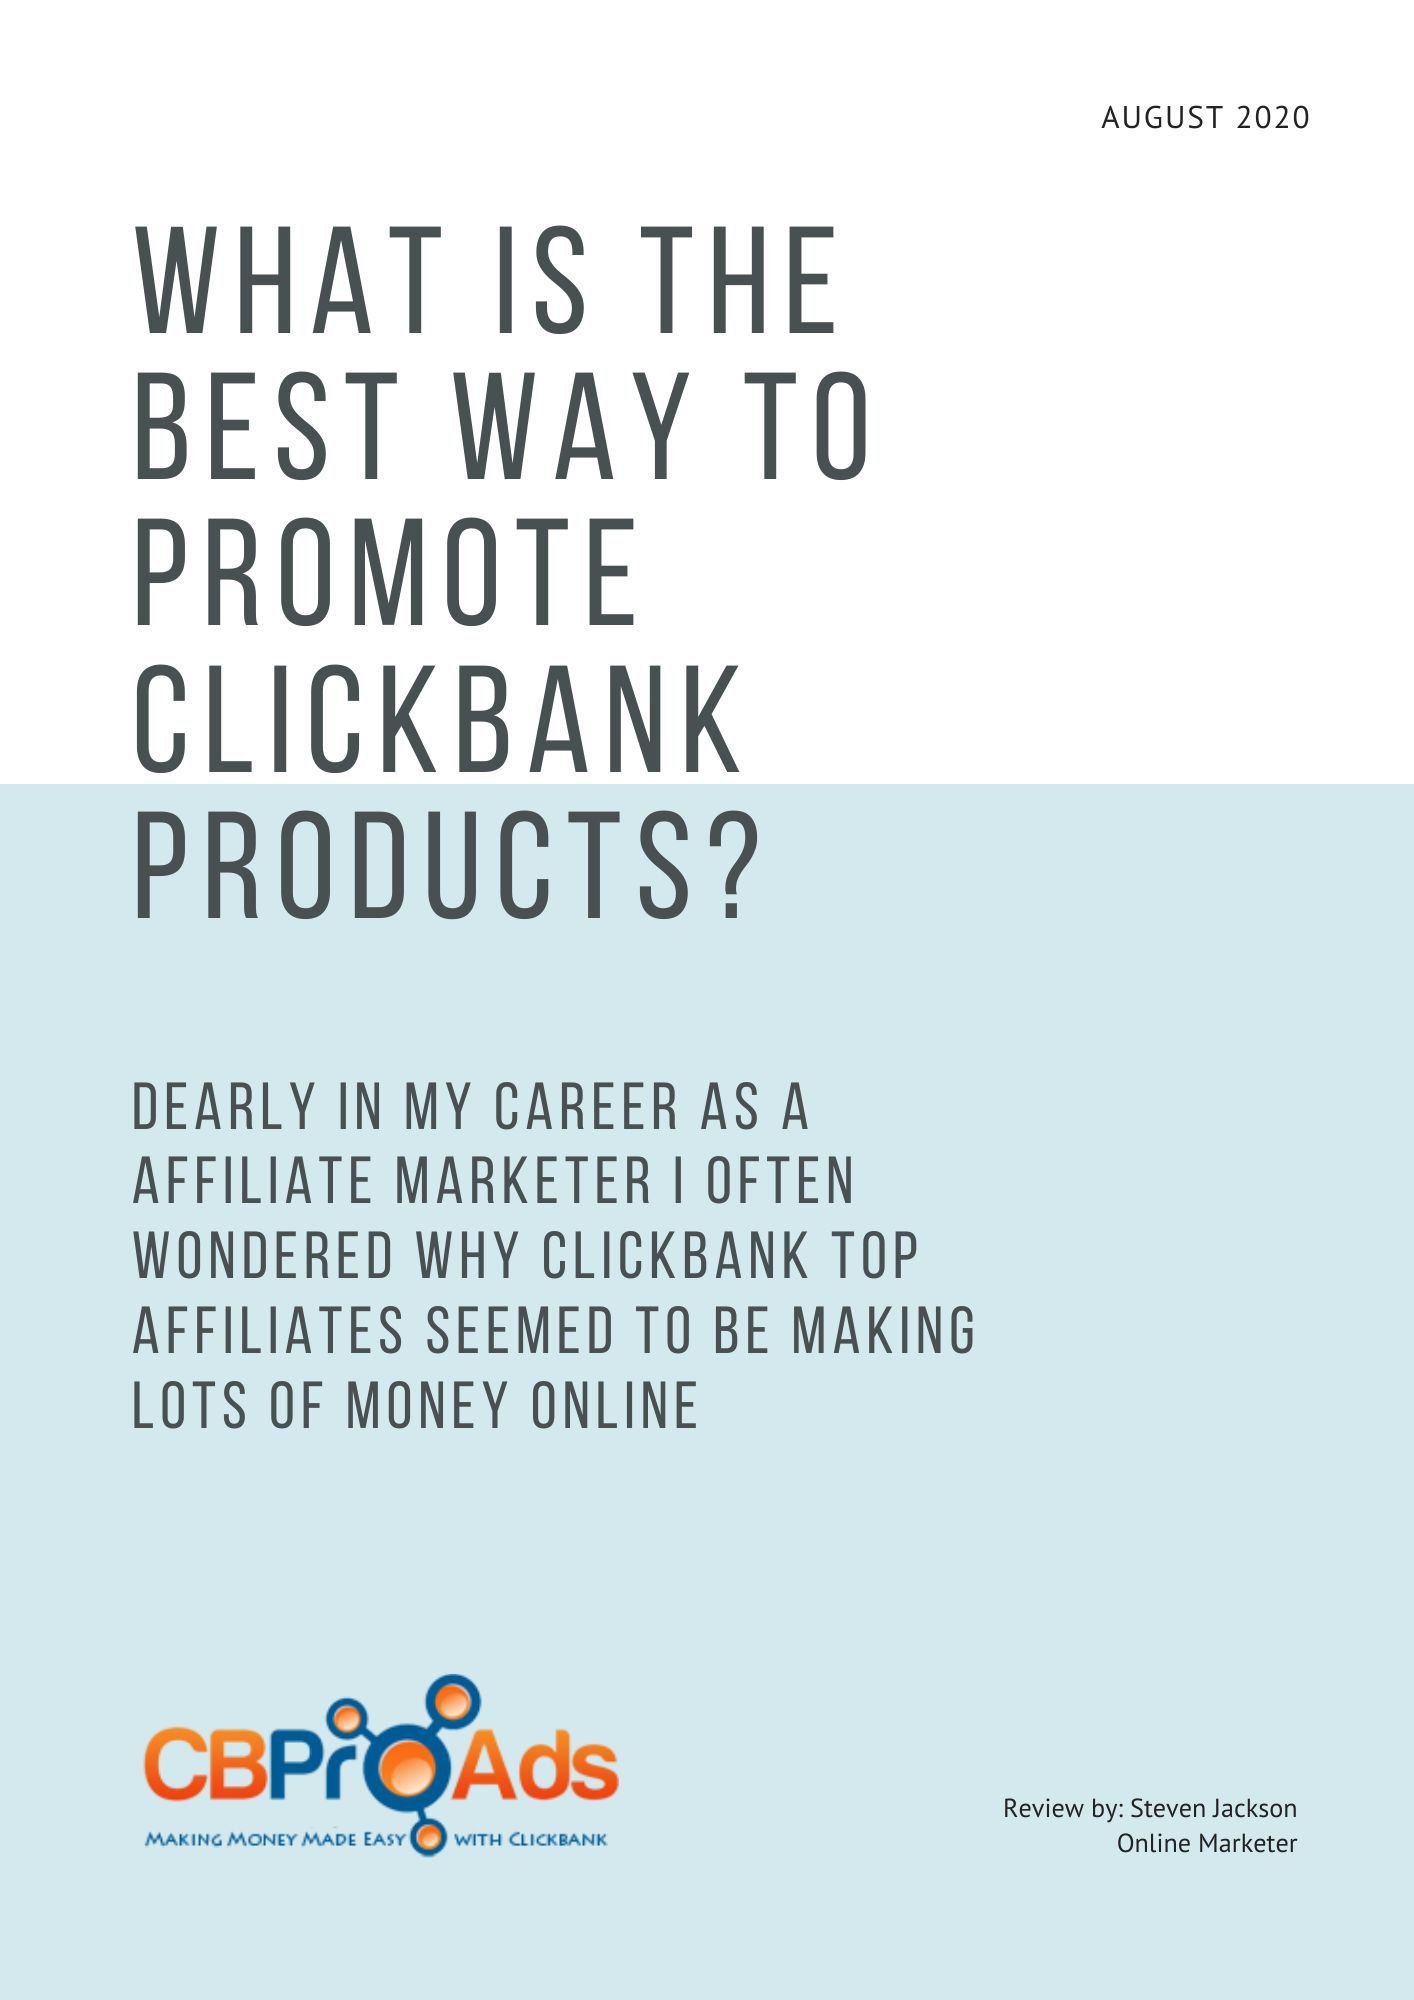 How to promote Clickbank products in 2020